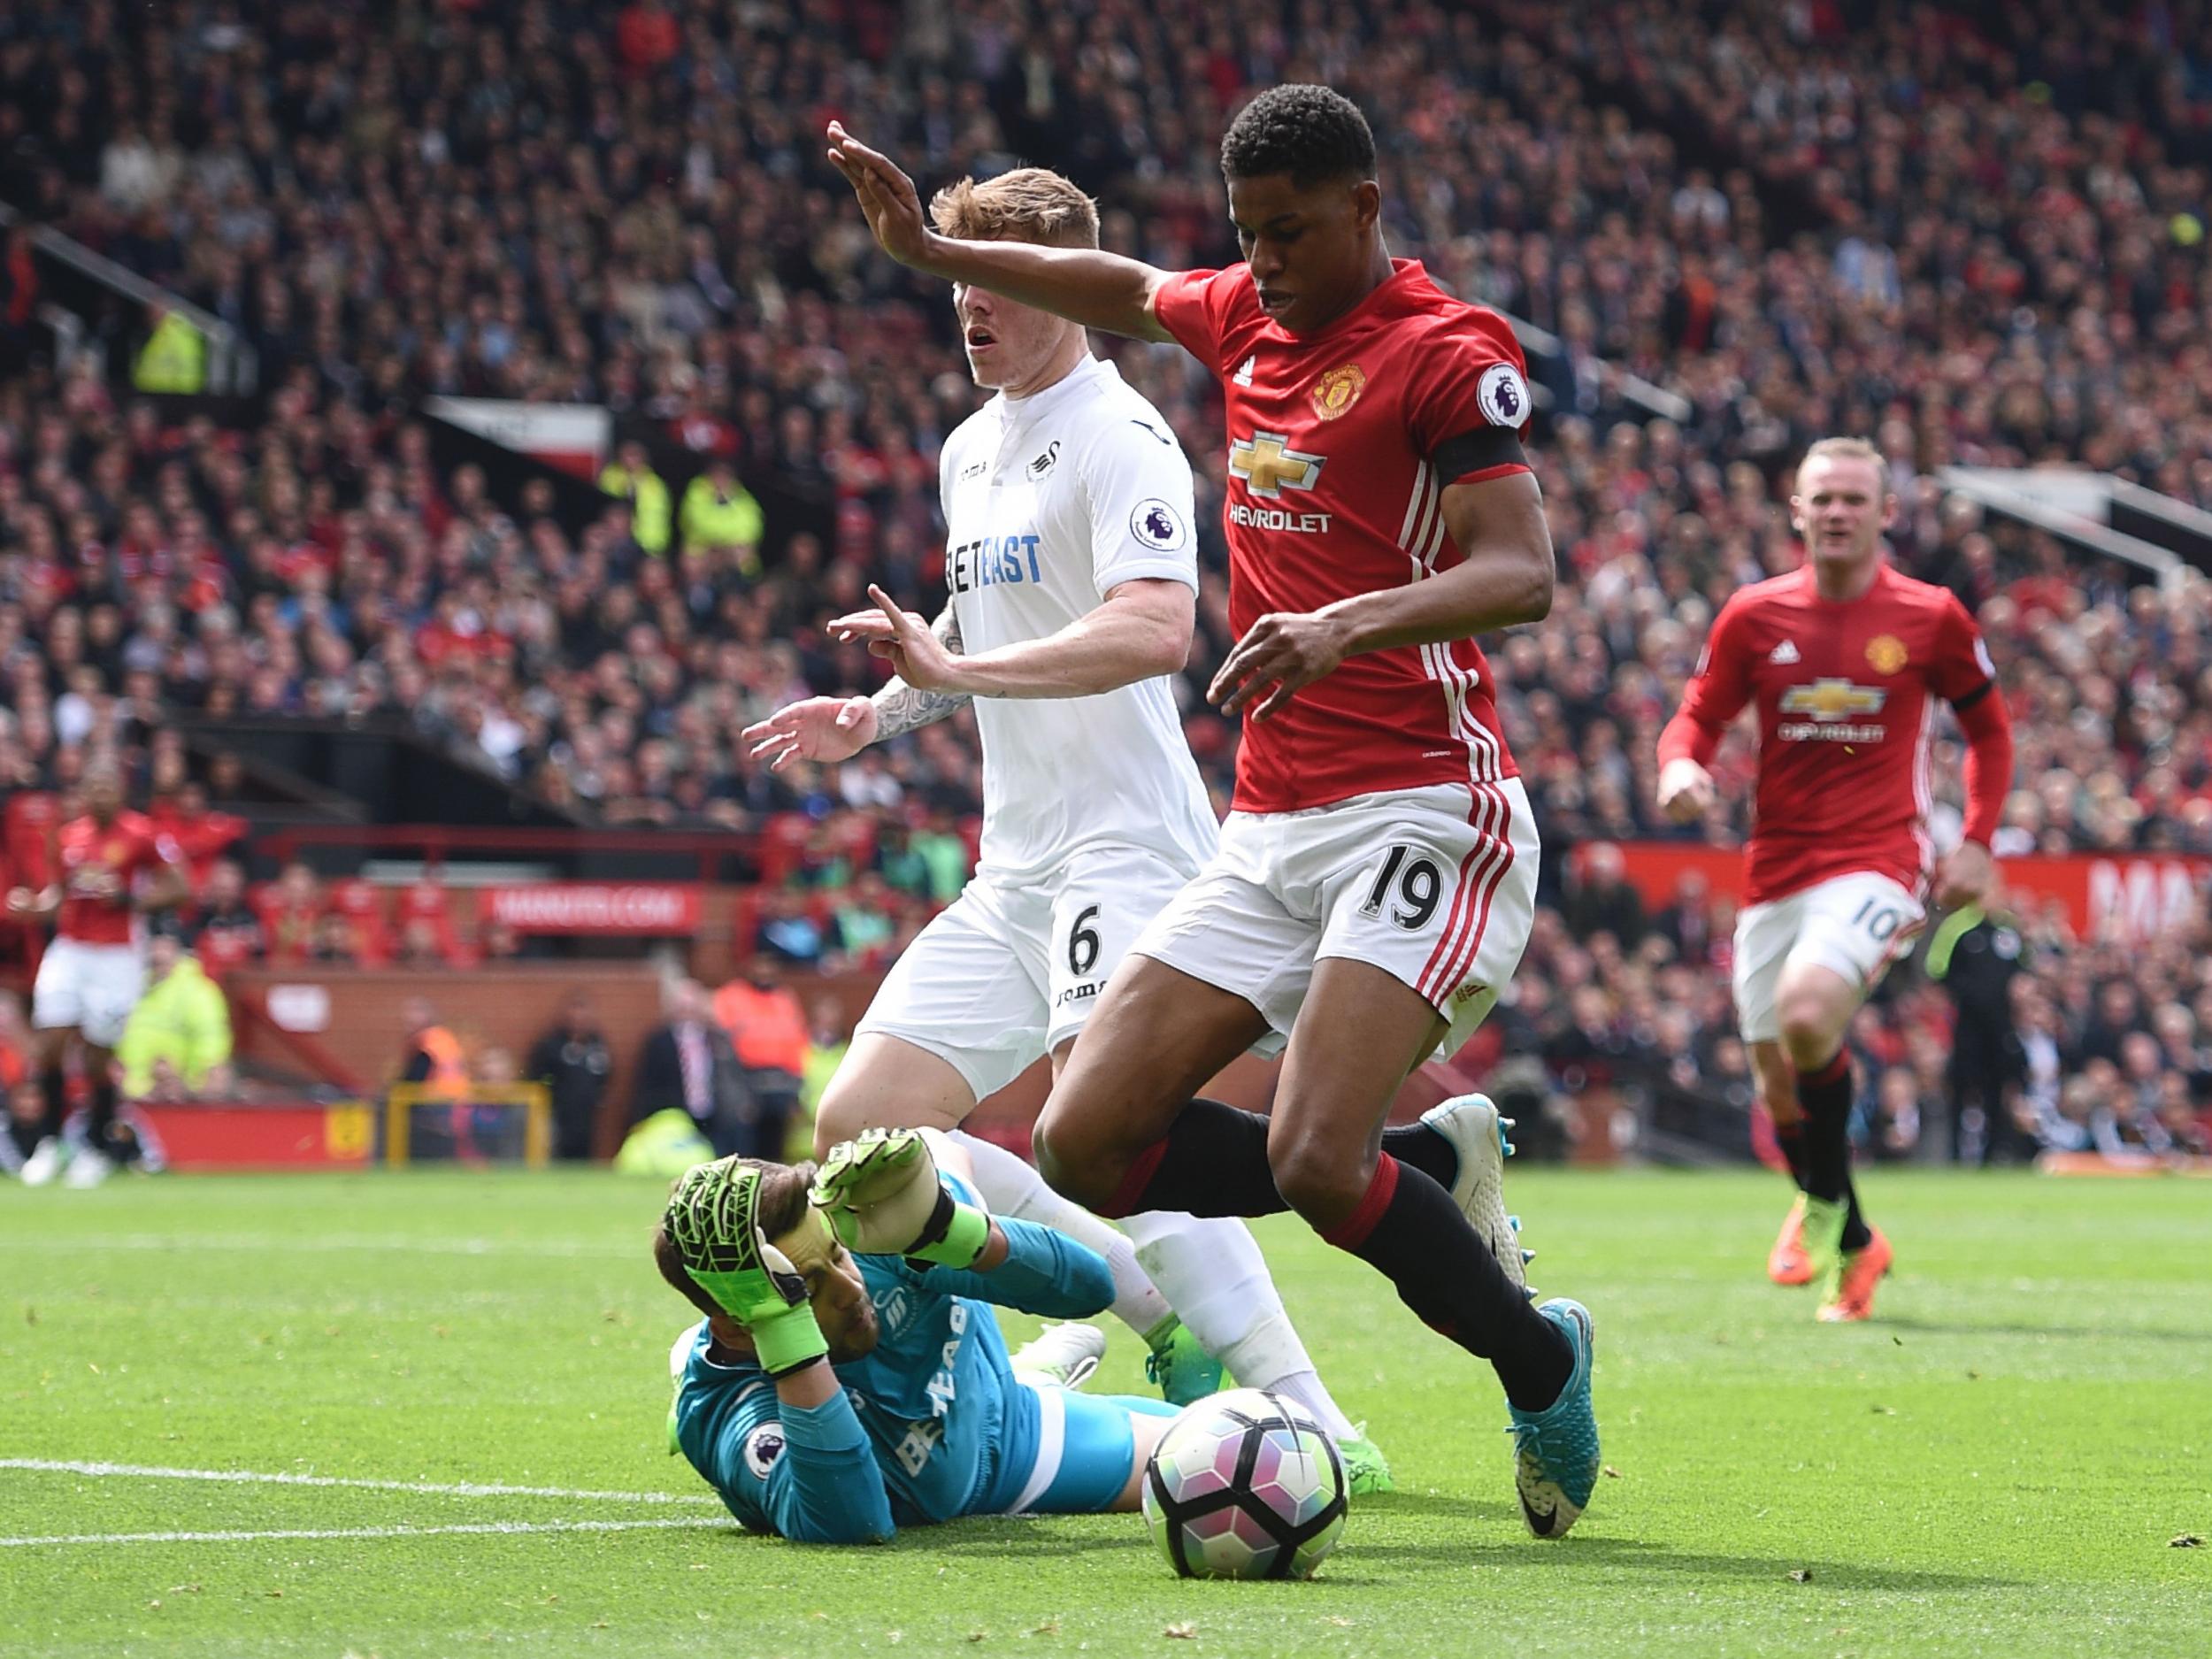 Rashford went to ground very softly for the penalty